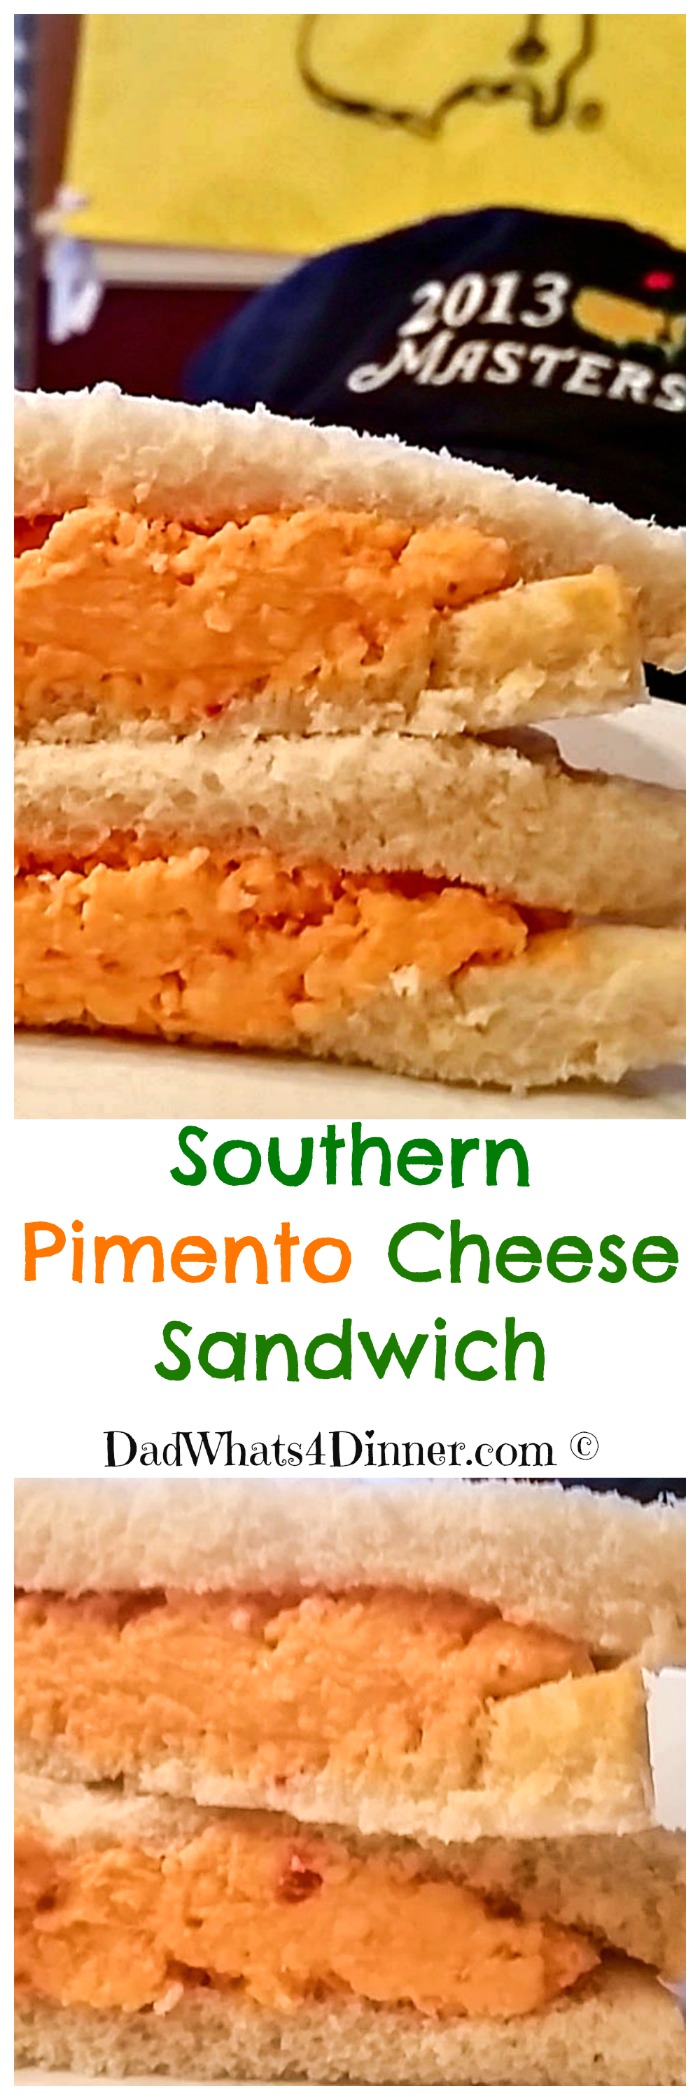  Southern Pimento Cheese Sandwich is a simple masterpiece of flavors. Perfect sandwich to eat while watching The Masters golf tournament.